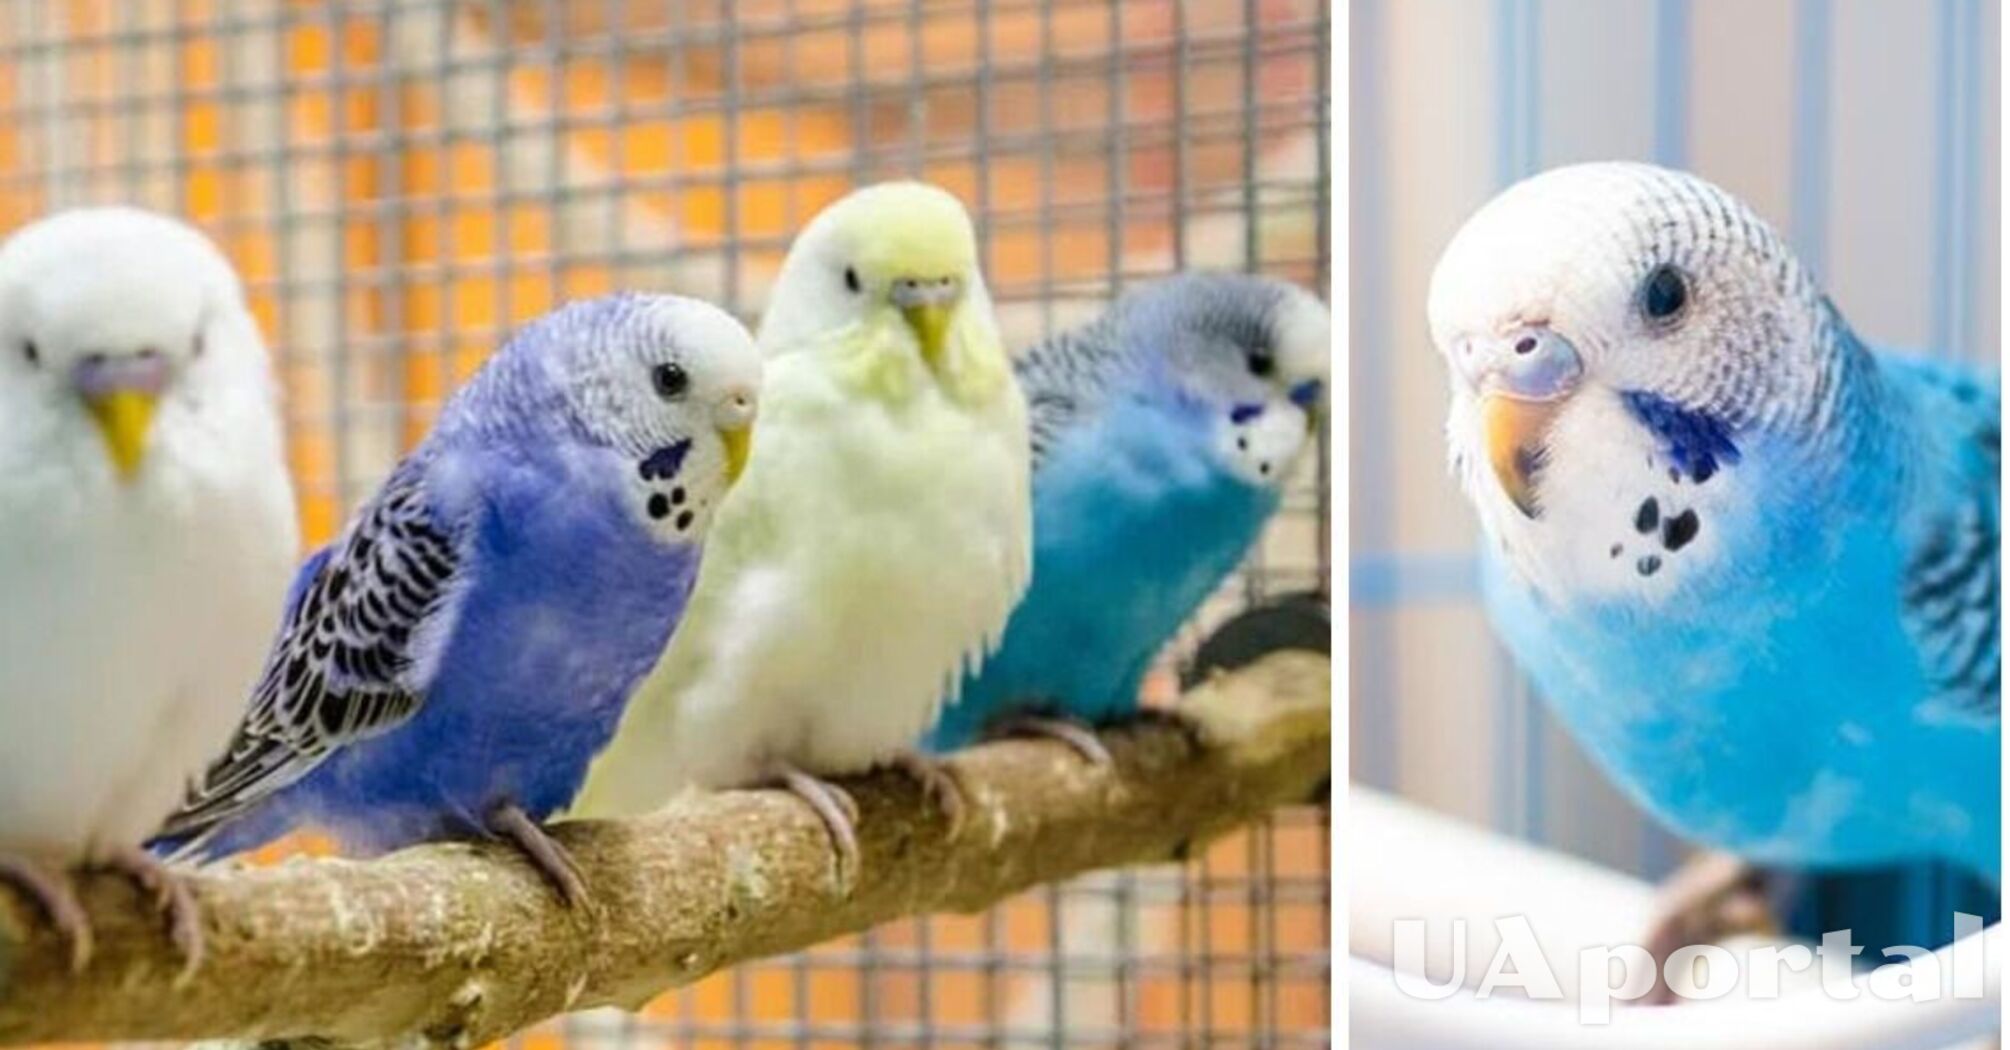 How to name a parrot so as not to regret it: Which names are better to choose